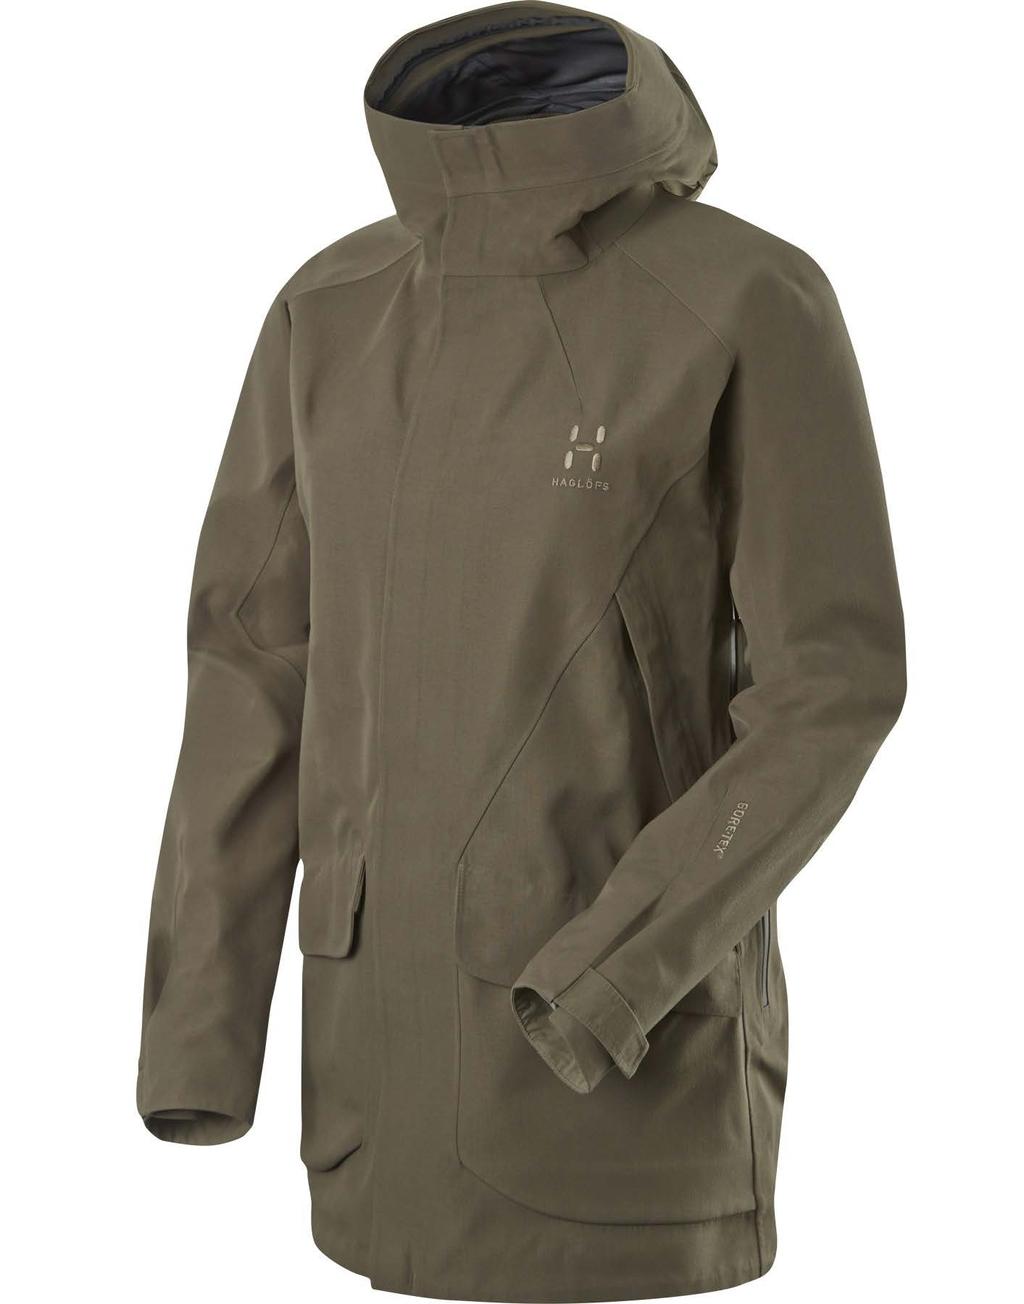 LIMA JACKET/ LIMA Q JACKET Hooded Lima Jacket is a heavy duty jacket with a combination of clean design, utility and technology. It incorporates 3-layer Gore-Tex for full wind- and waterproofing.